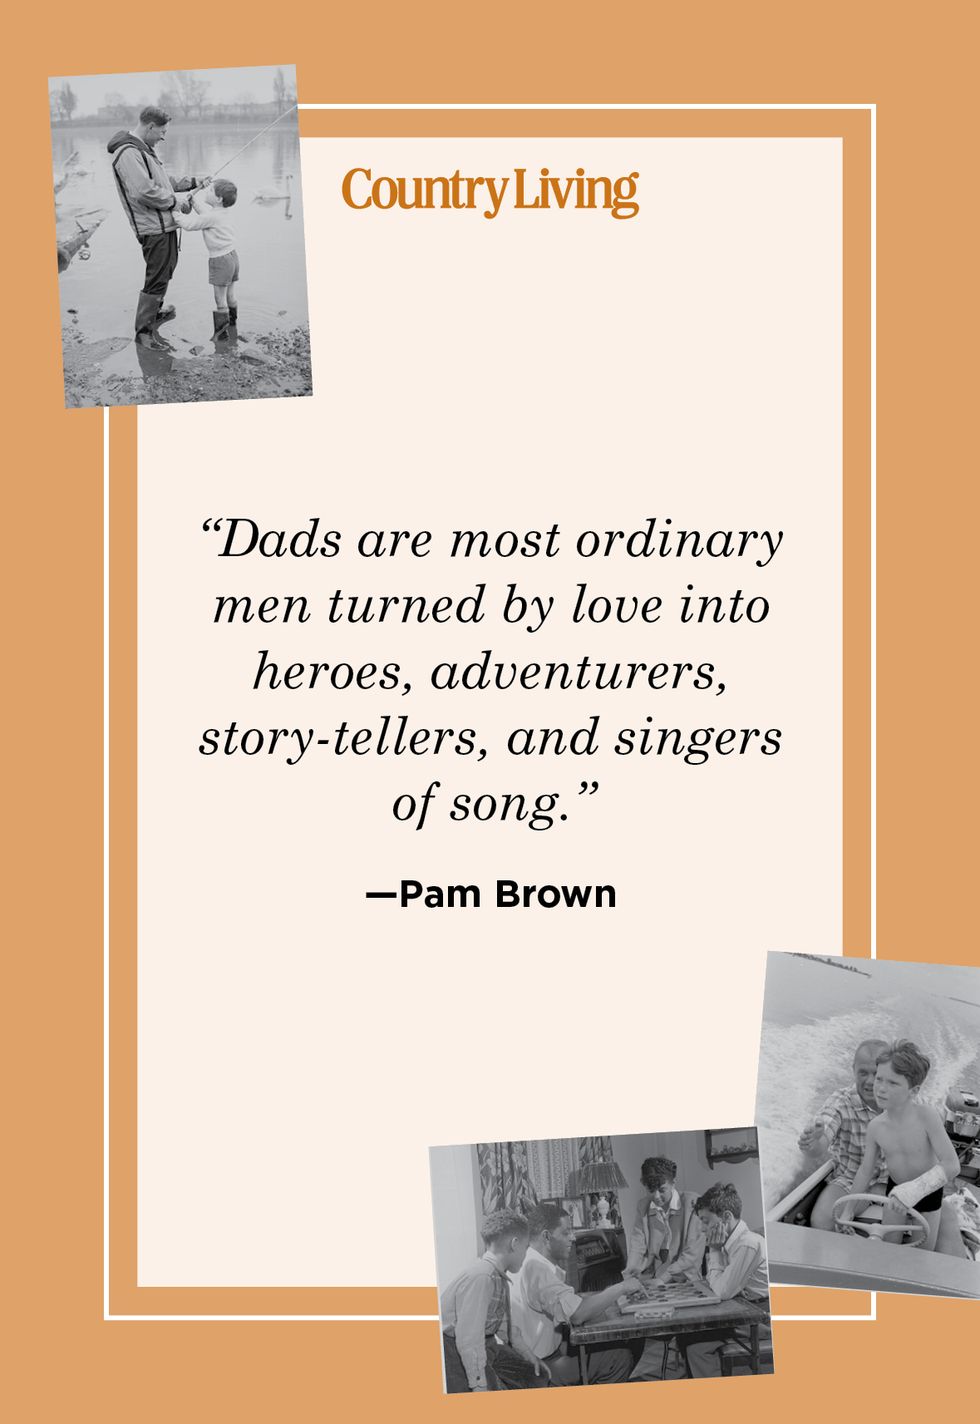 Happy Fathers Day Wishes and Quotes for Dad